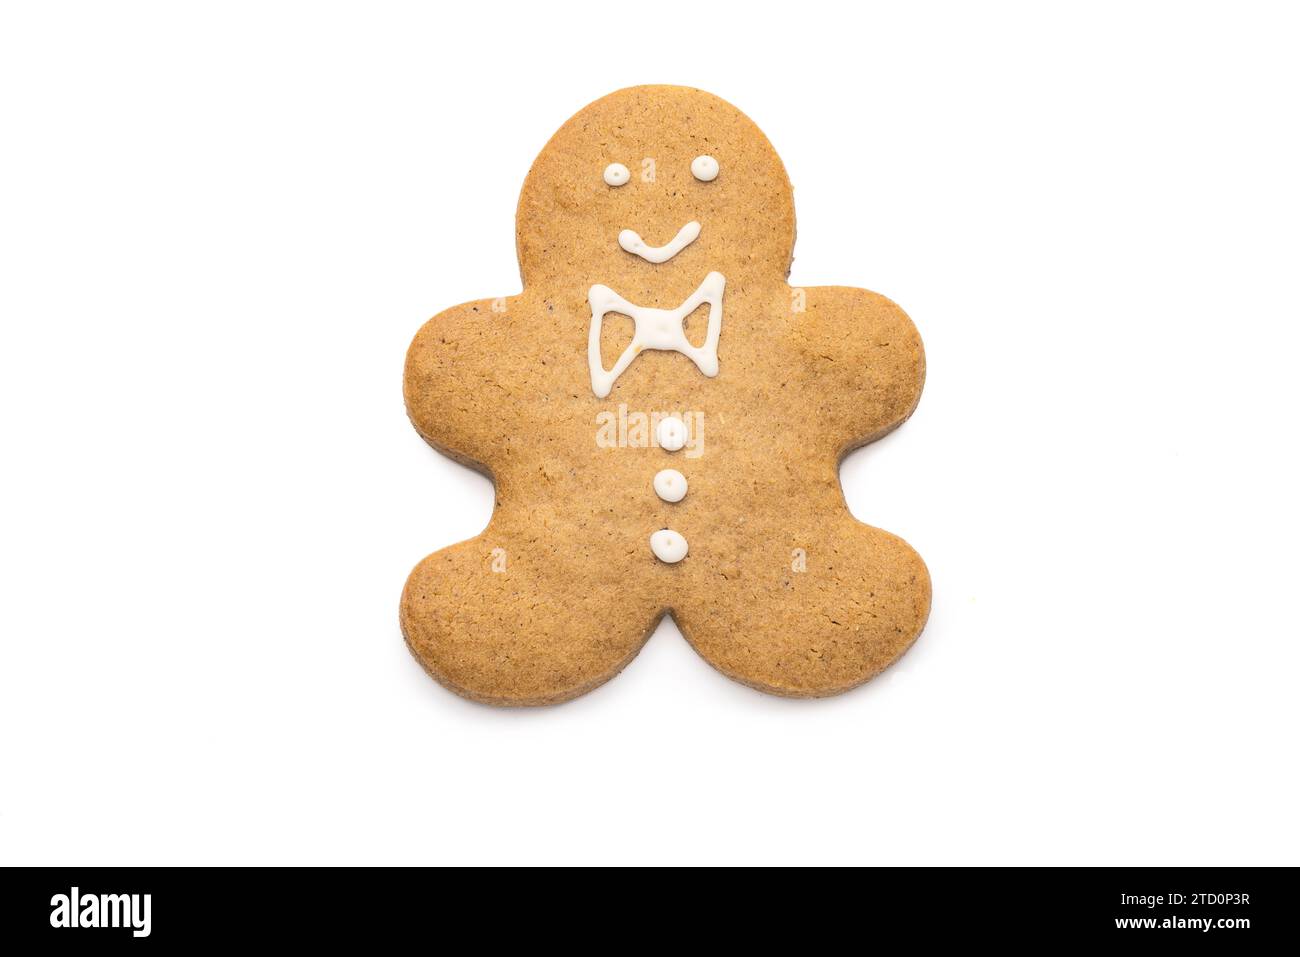 Christmas Gingerbread man cookie isolated on white background Stock Photo